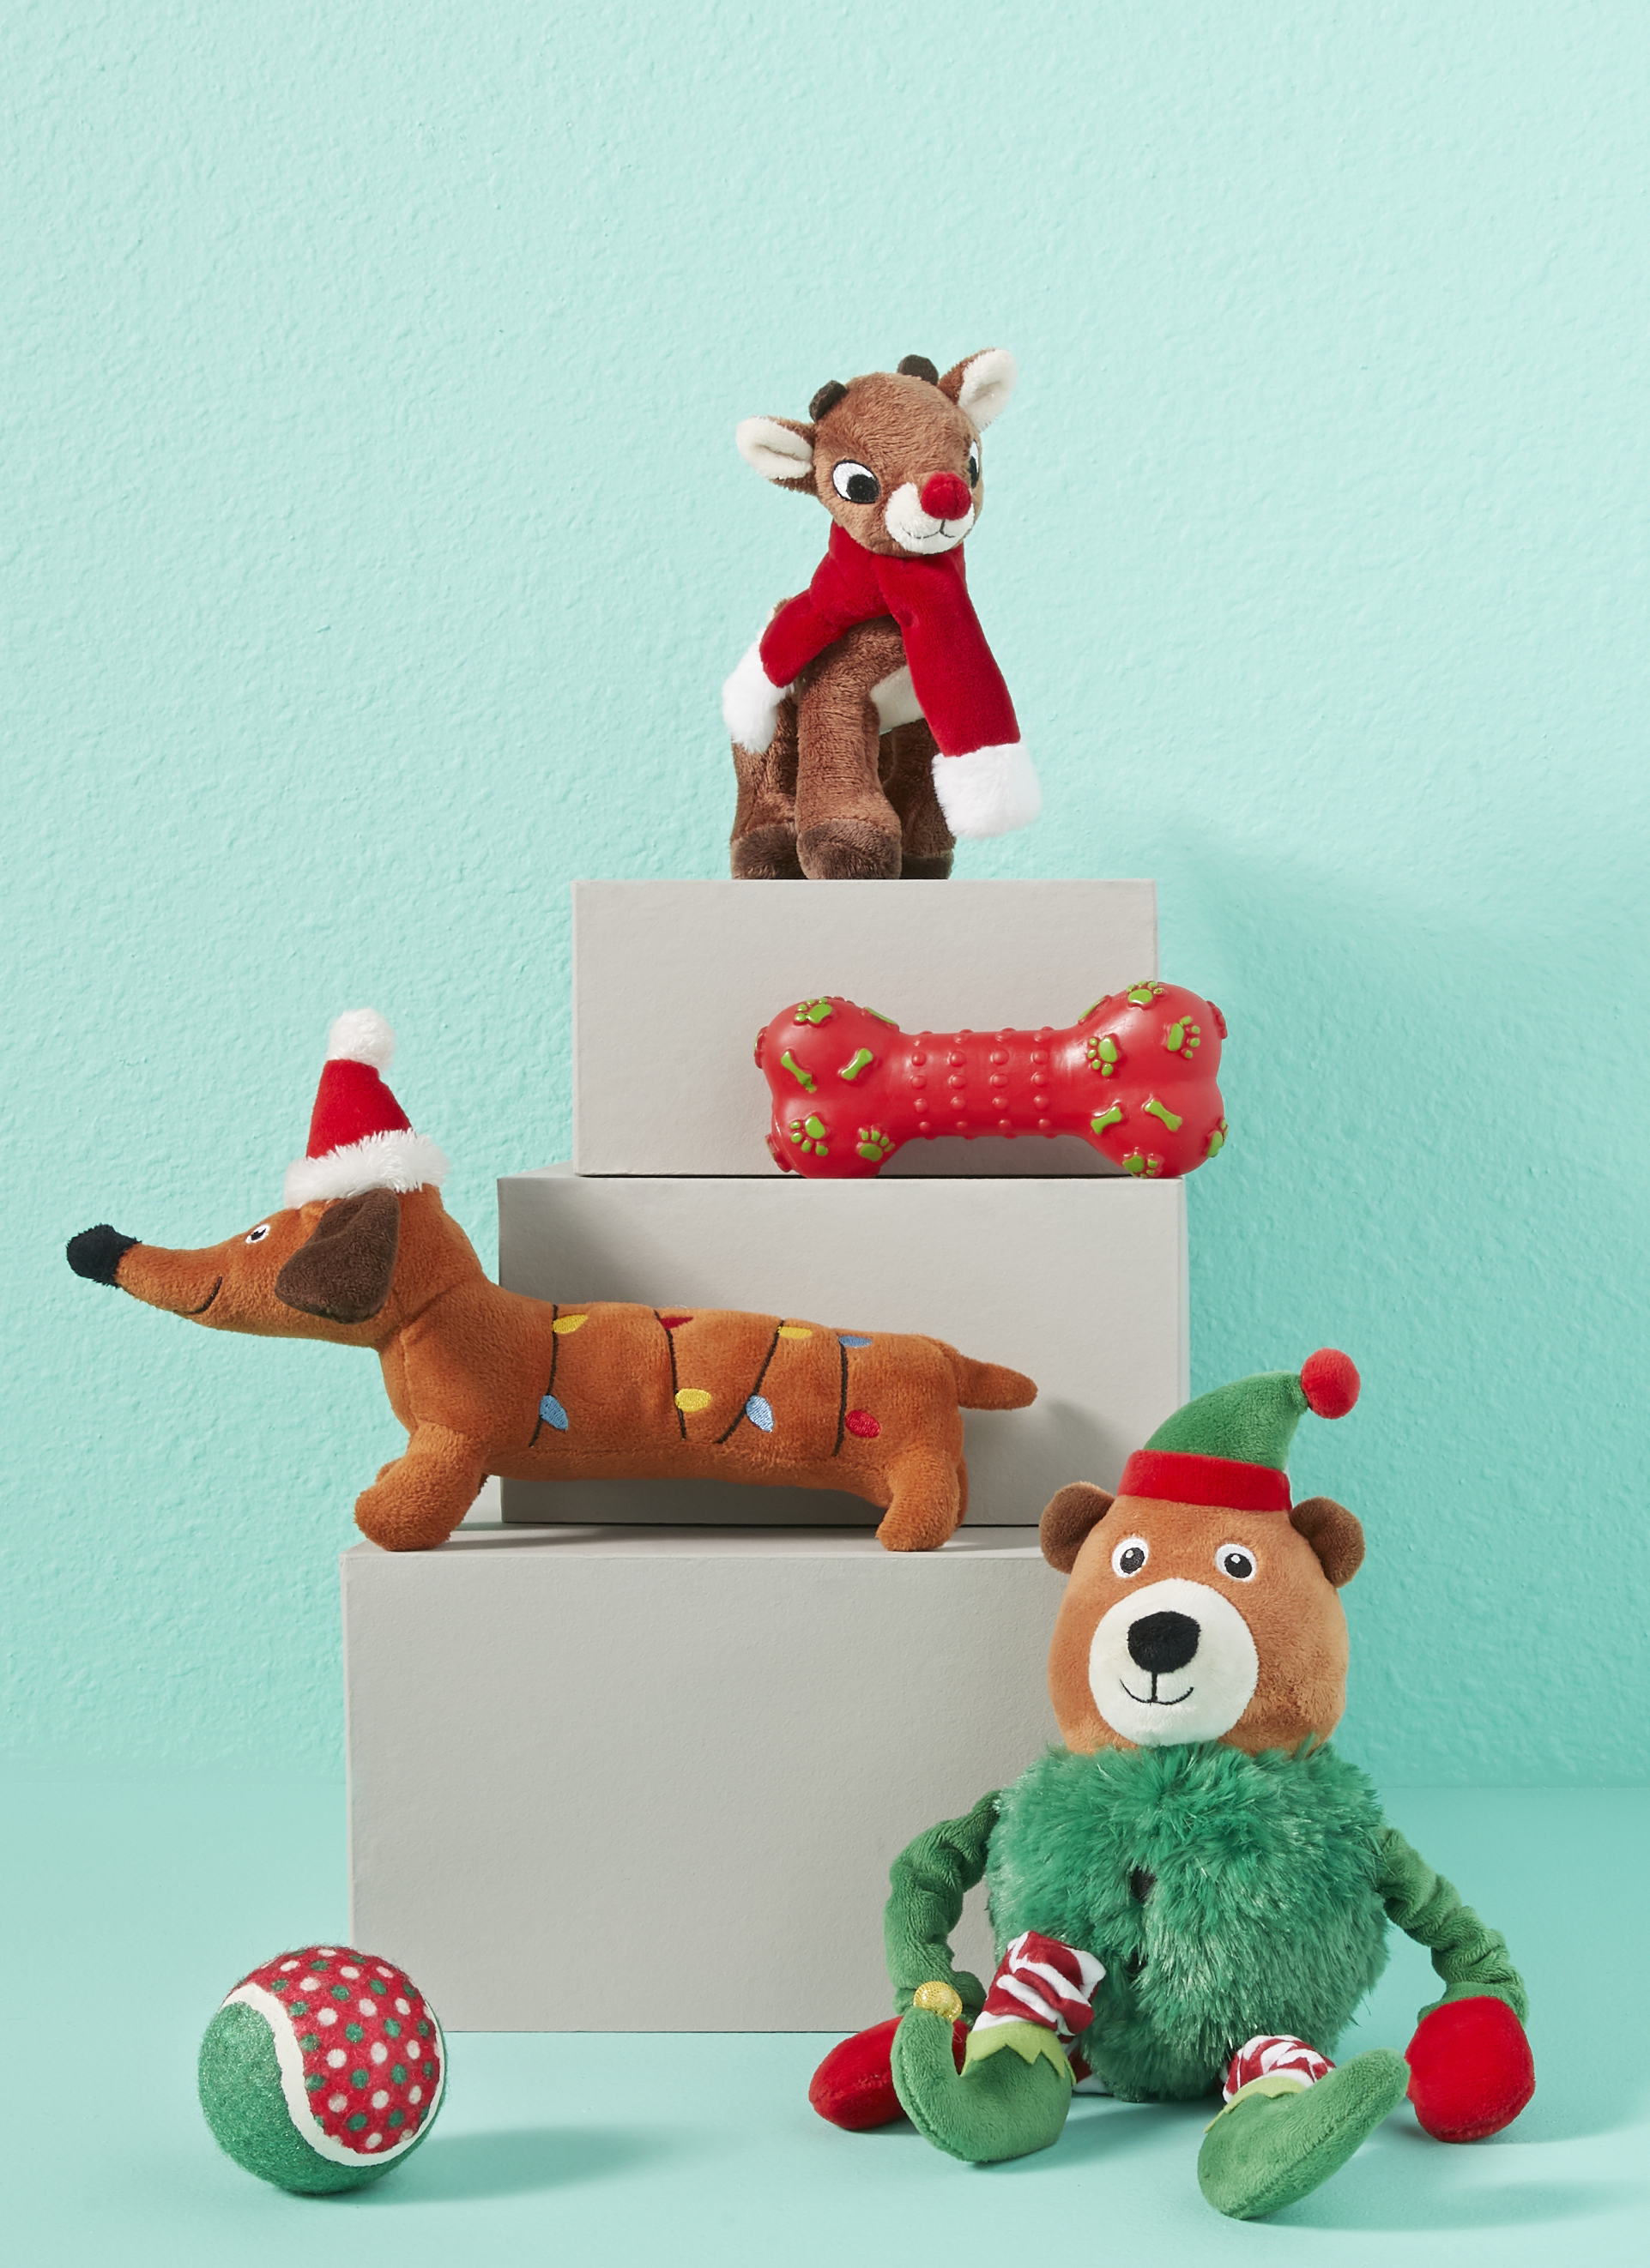 PetSmart® Unveils New Ways to Celebrate the Holidays with Pets